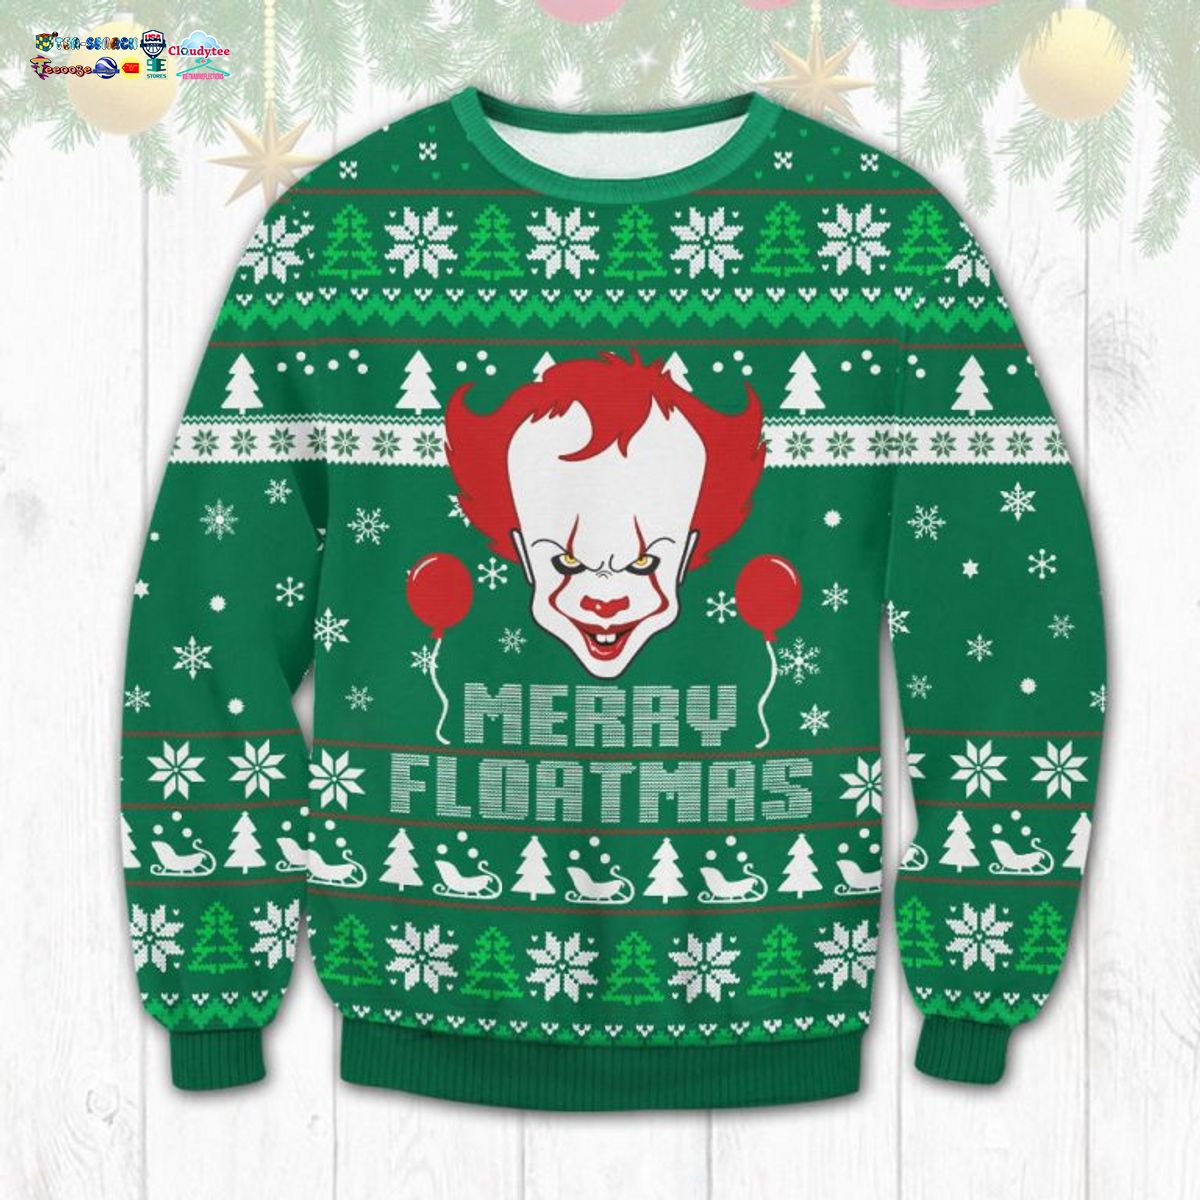 it-pennywise-merry-floatmas-ugly-christmas-sweater-1-Q4Ef4.jpg